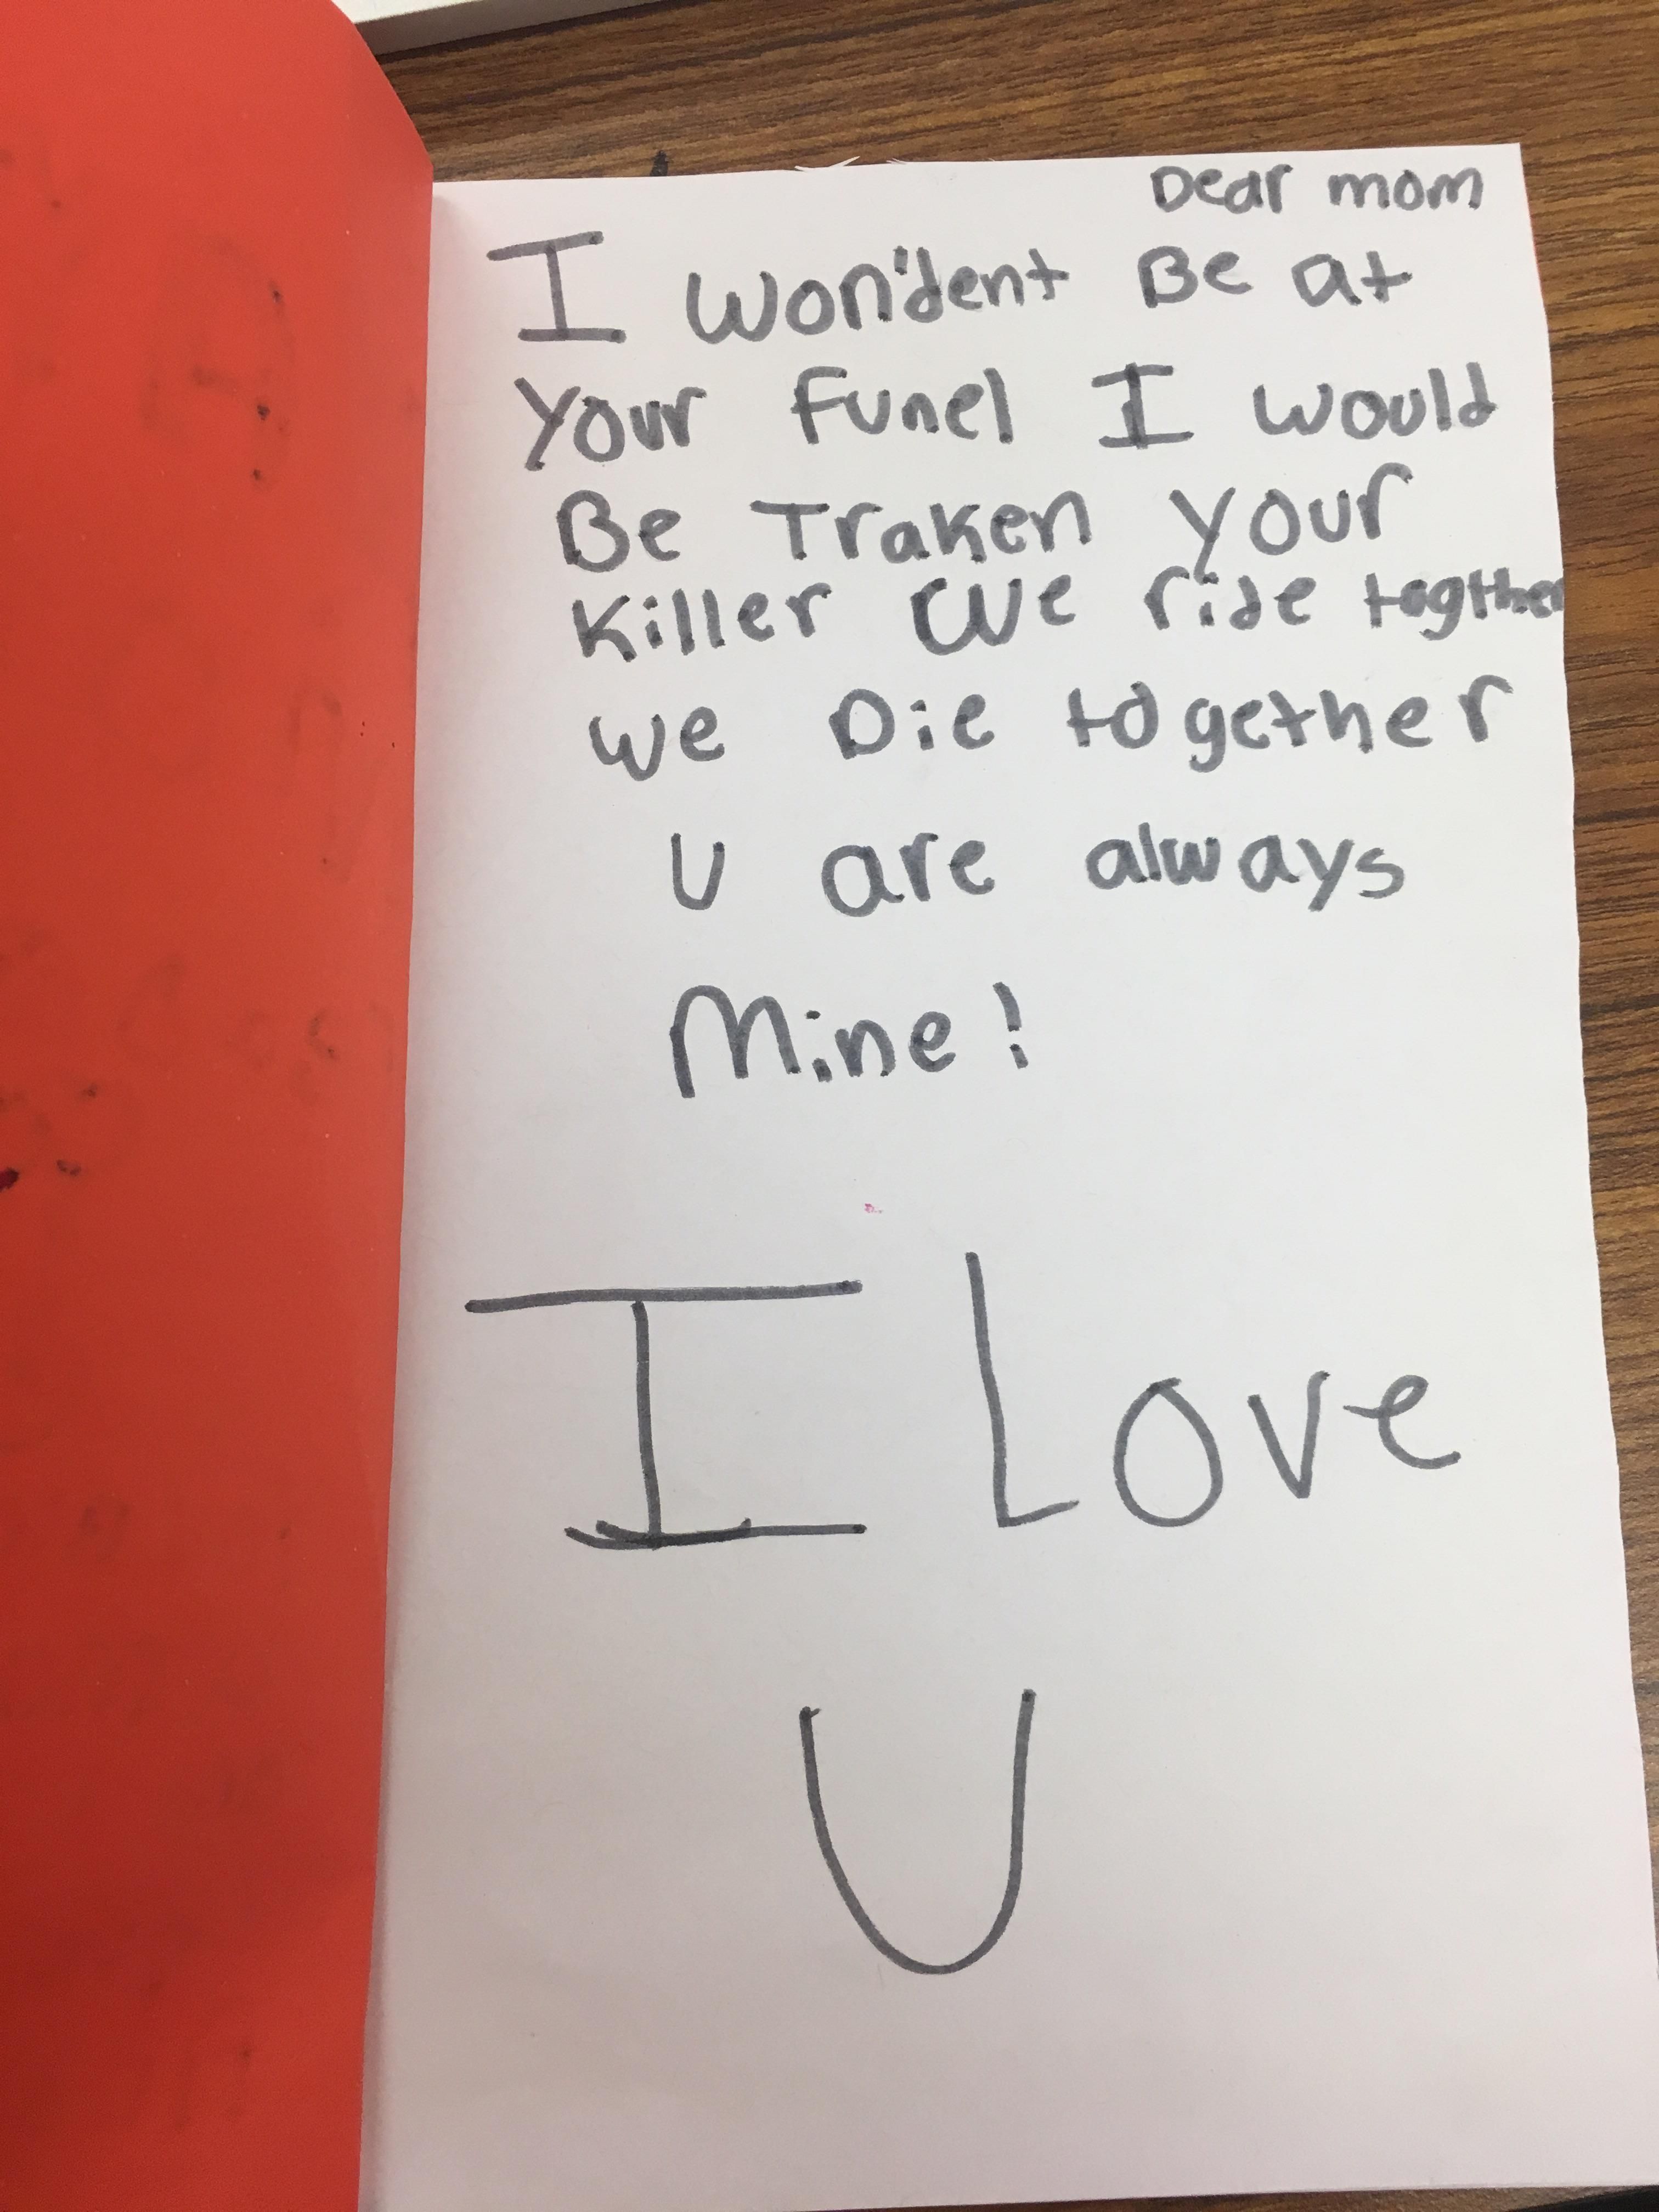 Mothers Day cards are Lit this year in my 4th grade class.